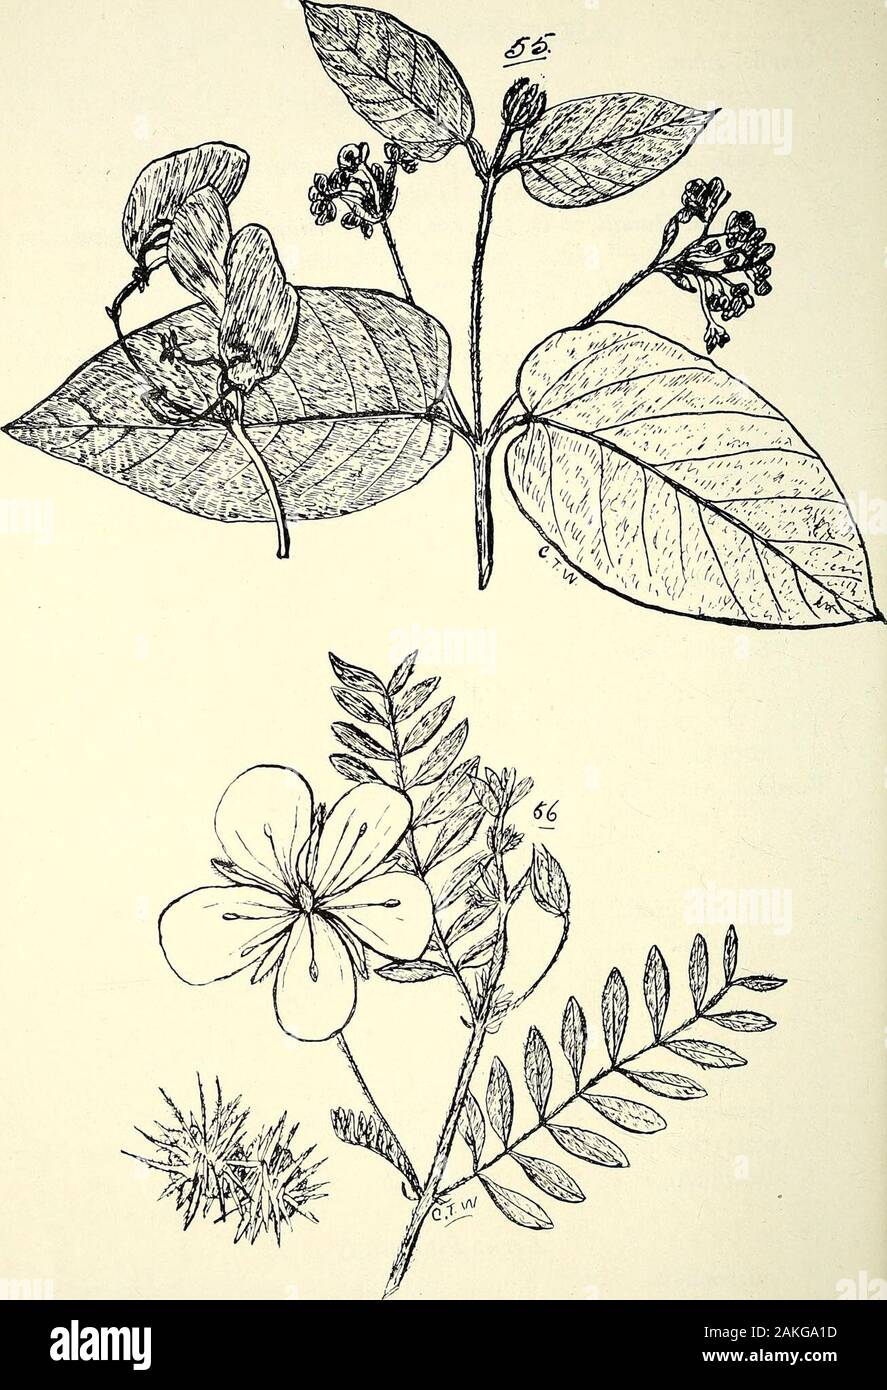 Comprehensive catalogue of Queensland plants, both indigenous and naturalisedTo which are added, where known, the aboriginal and other vernacular names; with numerous illustrations, and copious notes on the properties, features, &c., of the plants . rn in-land localities. XXIX. RUTACE^. 73 Tribe III.—Oxalide^e.Oxalis, Linn. *corymbosa, DC.—A troublesome garden weed; native of Brazil,corniculata, Linn.—Wood sorrel; Sourgrass. Very variable as to size of foliage and flowers.sessilis, Hauiilt. = 0. Petersii, Klotz., Biophytum Apodiscias,Turcz.—Leaves sensitive to the touch. (Fig. 58.) Order XXIX. Stock Photo